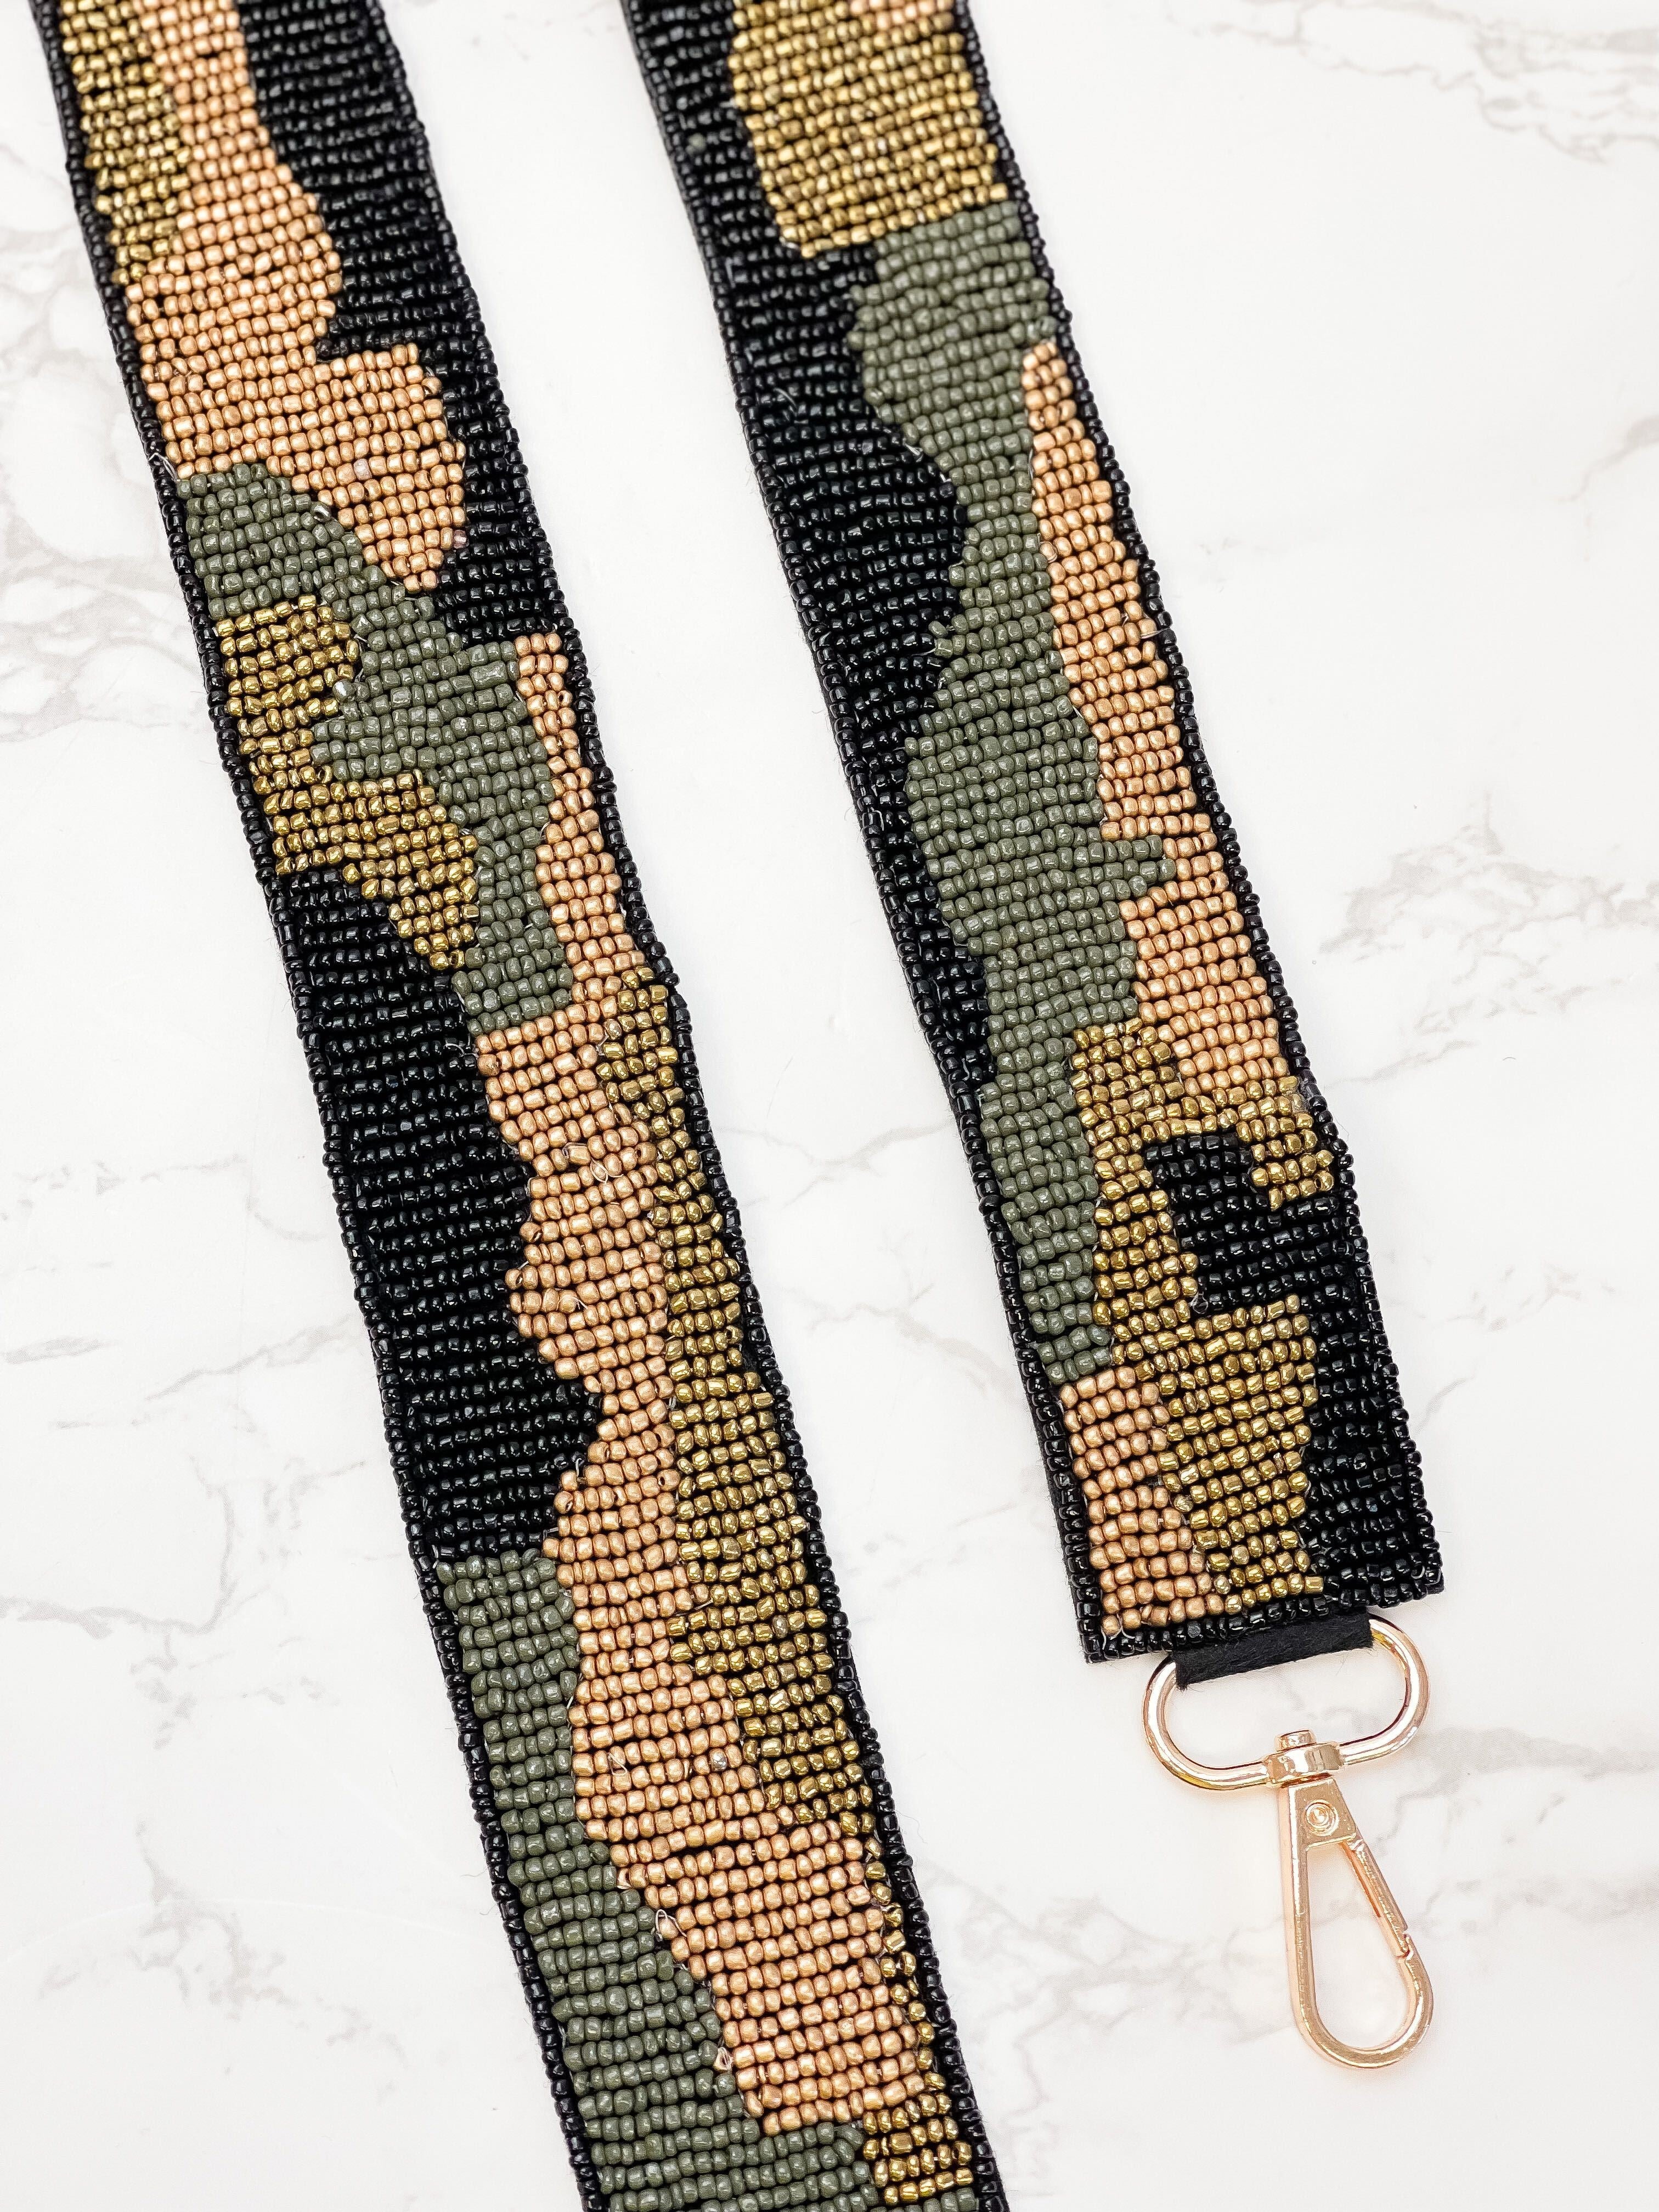 Beaded Purse Strap - Camouflage